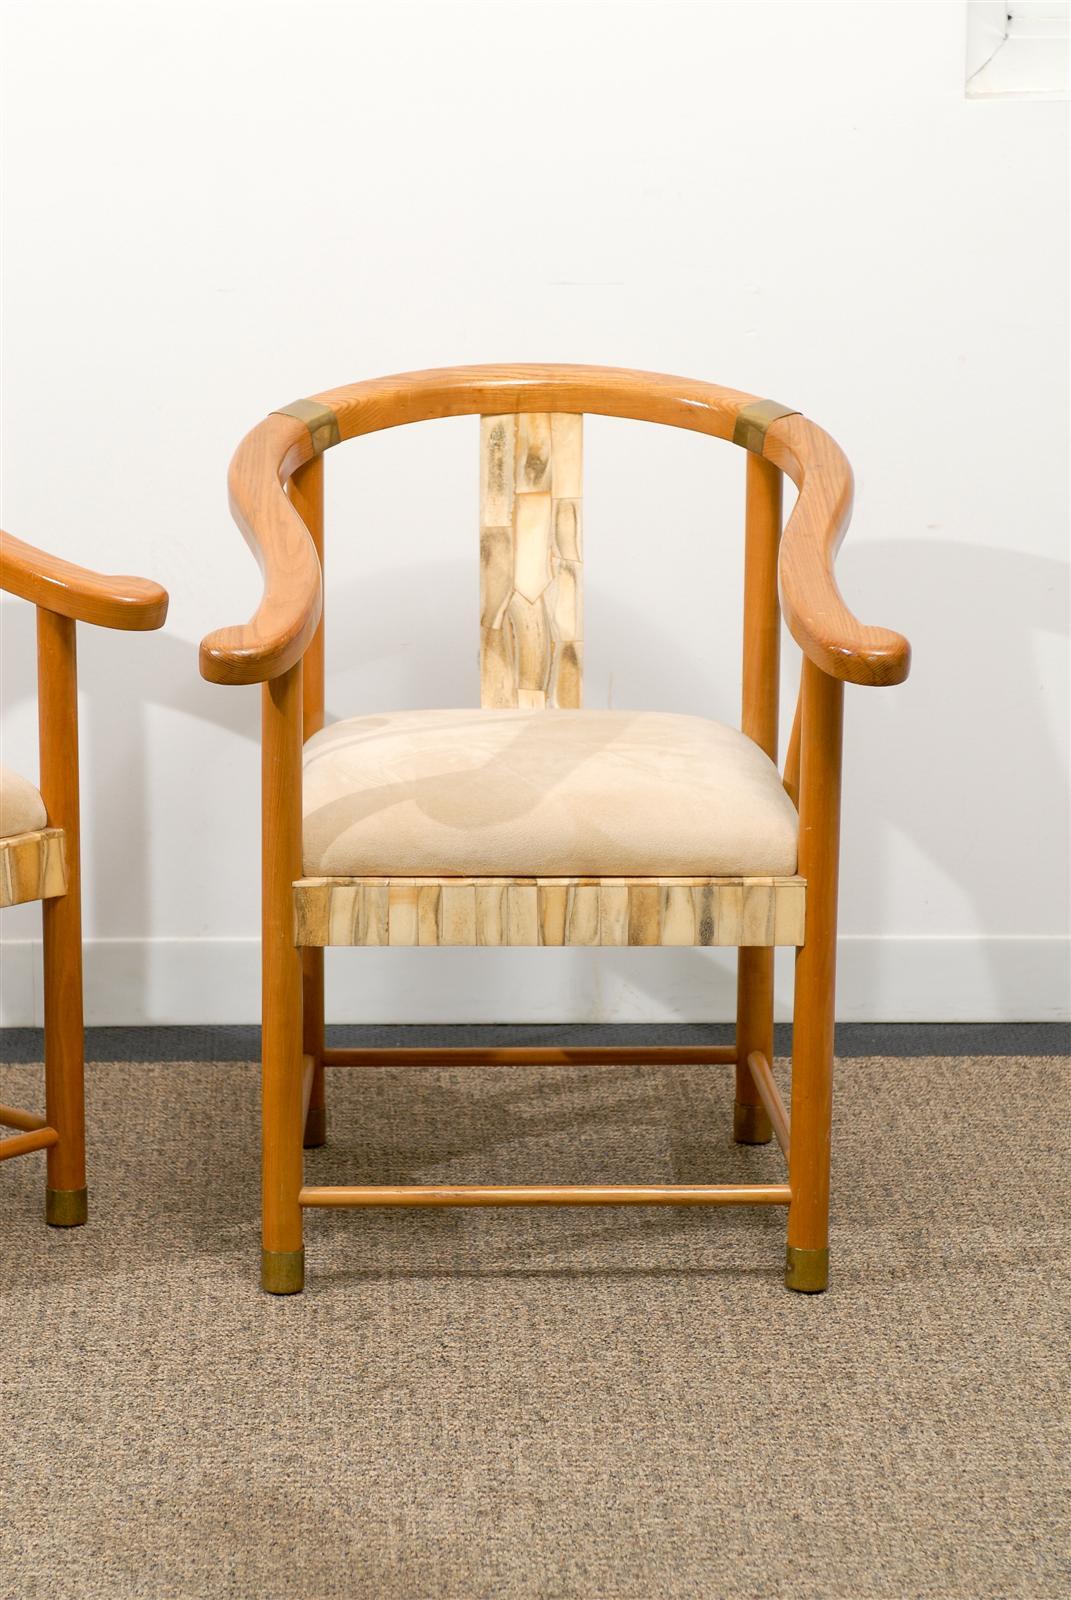 Pair of Asian Inspired Midcentury Chairs with Bone and Brass Detail For Sale 3